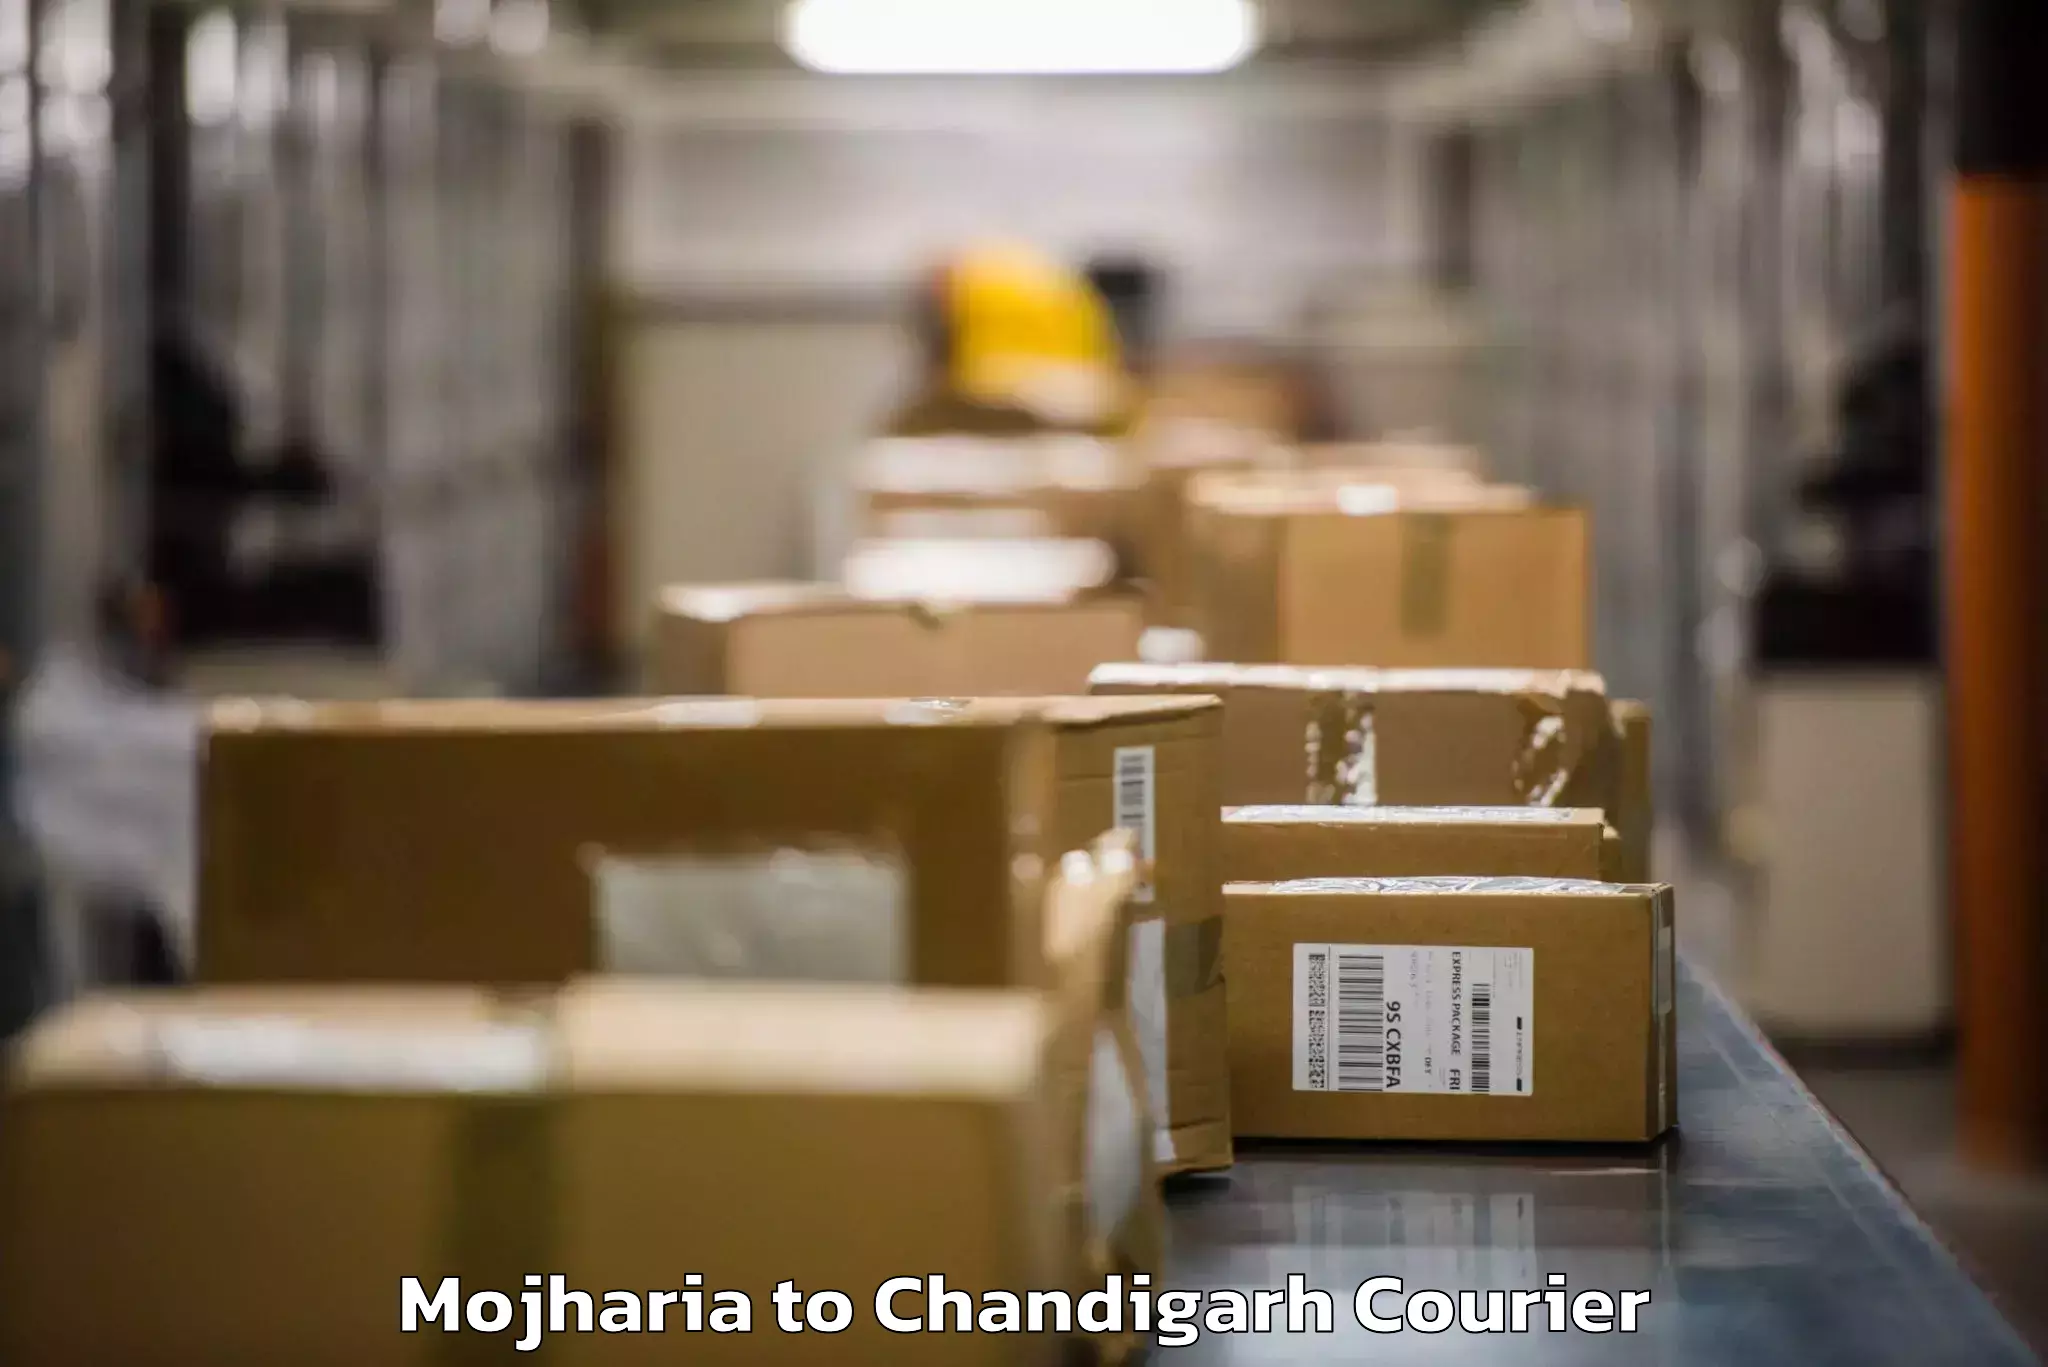 Baggage shipping schedule Mojharia to Chandigarh